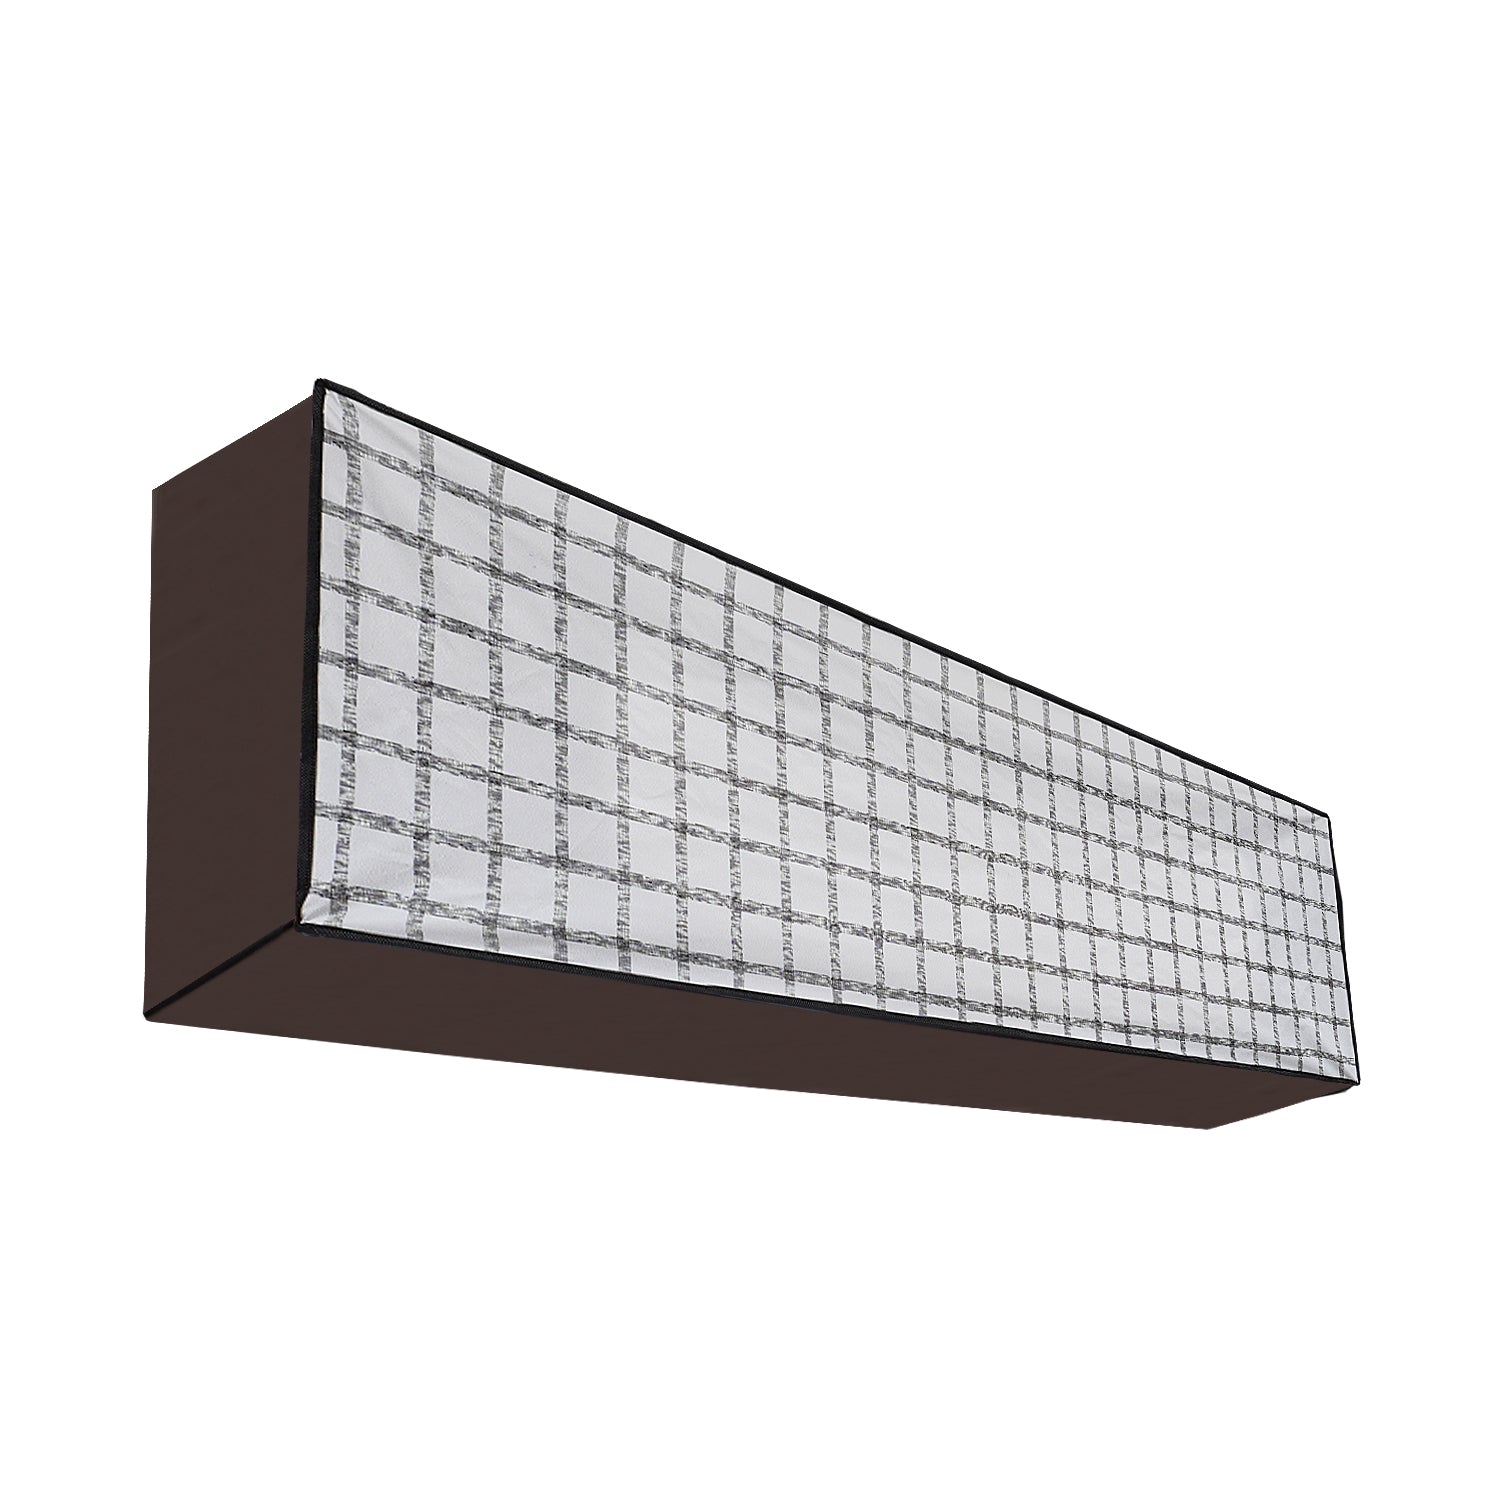 Waterproof and Dustproof Split Indoor AC Cover, CA08 - Dream Care Furnishings Private Limited